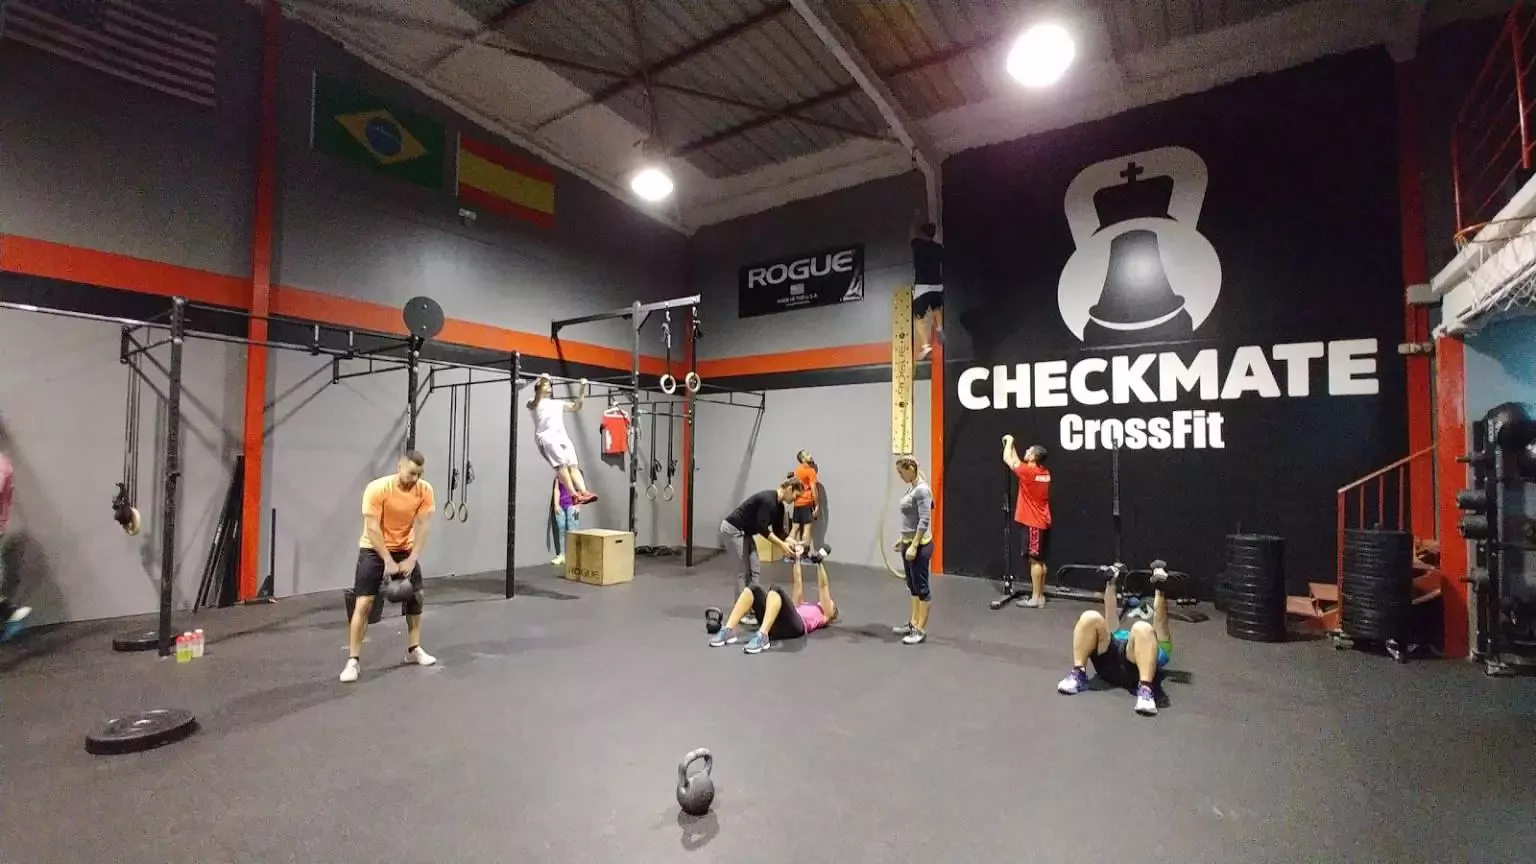 5. Checkmate Crossfit